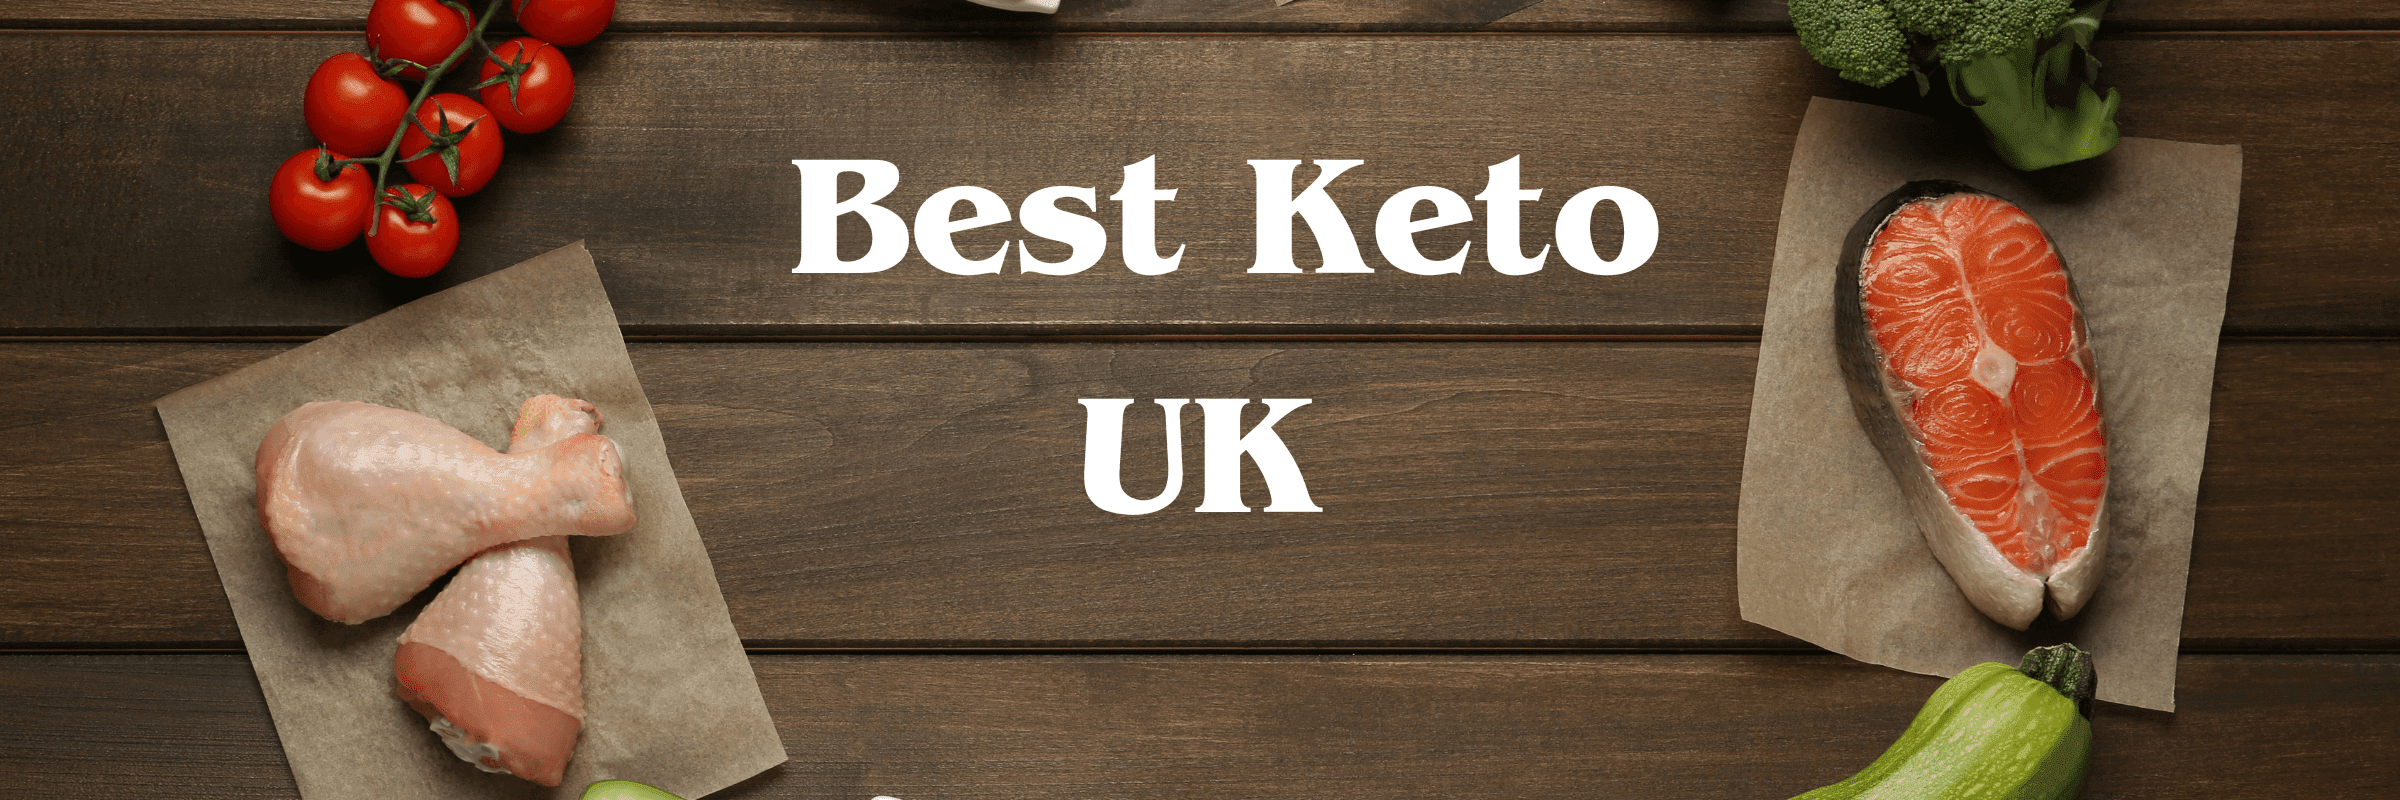 Best Keto UK, keto foods and products information and resources